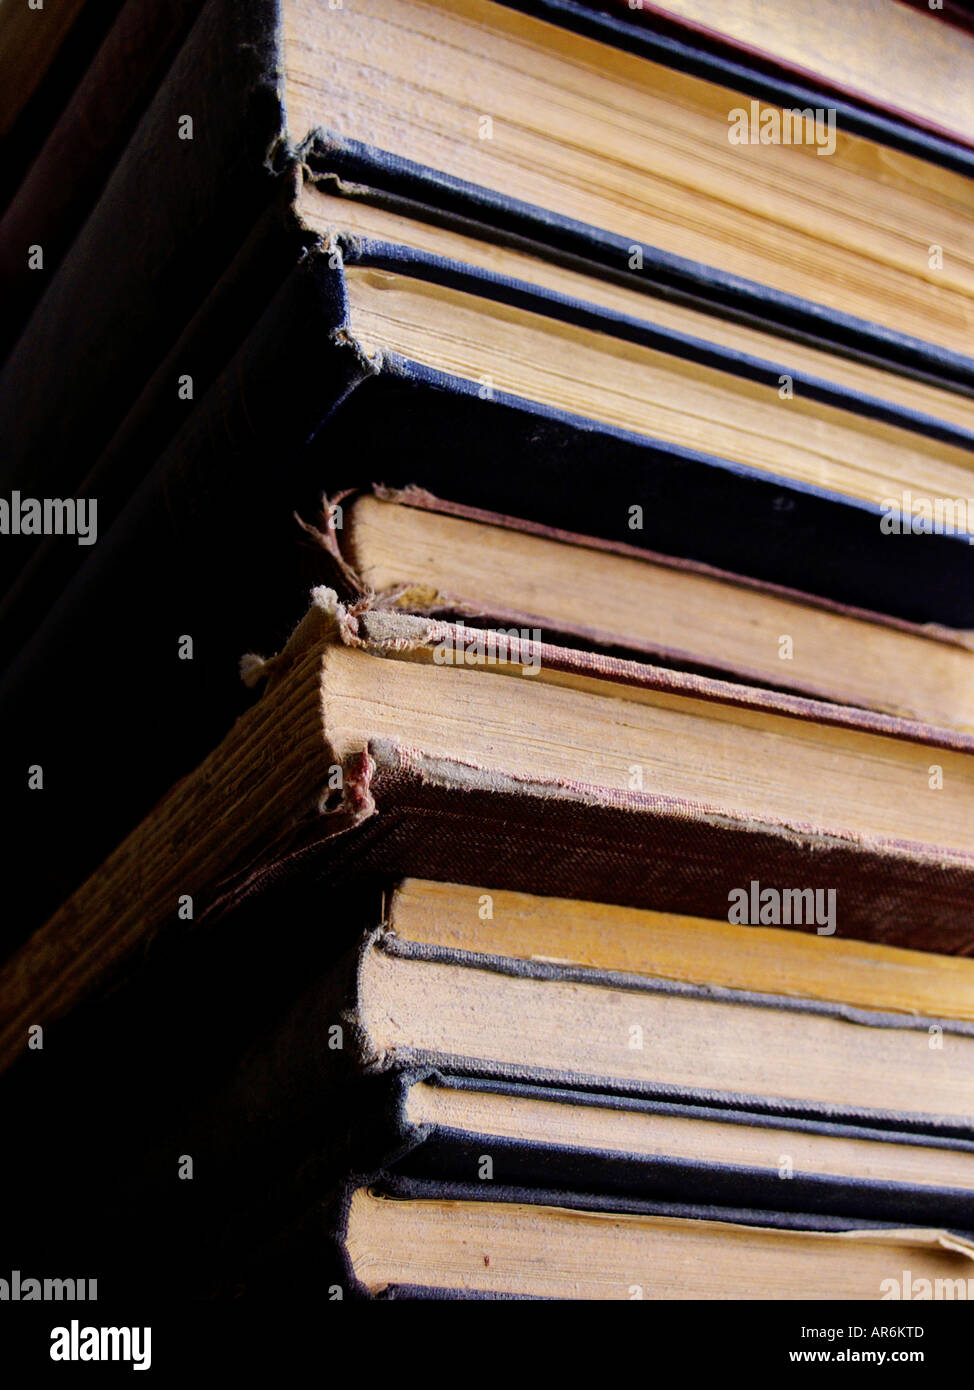 A stack of very old dusty yellowing books with decaying covers in extremely strong light and shadow. Stock Photo